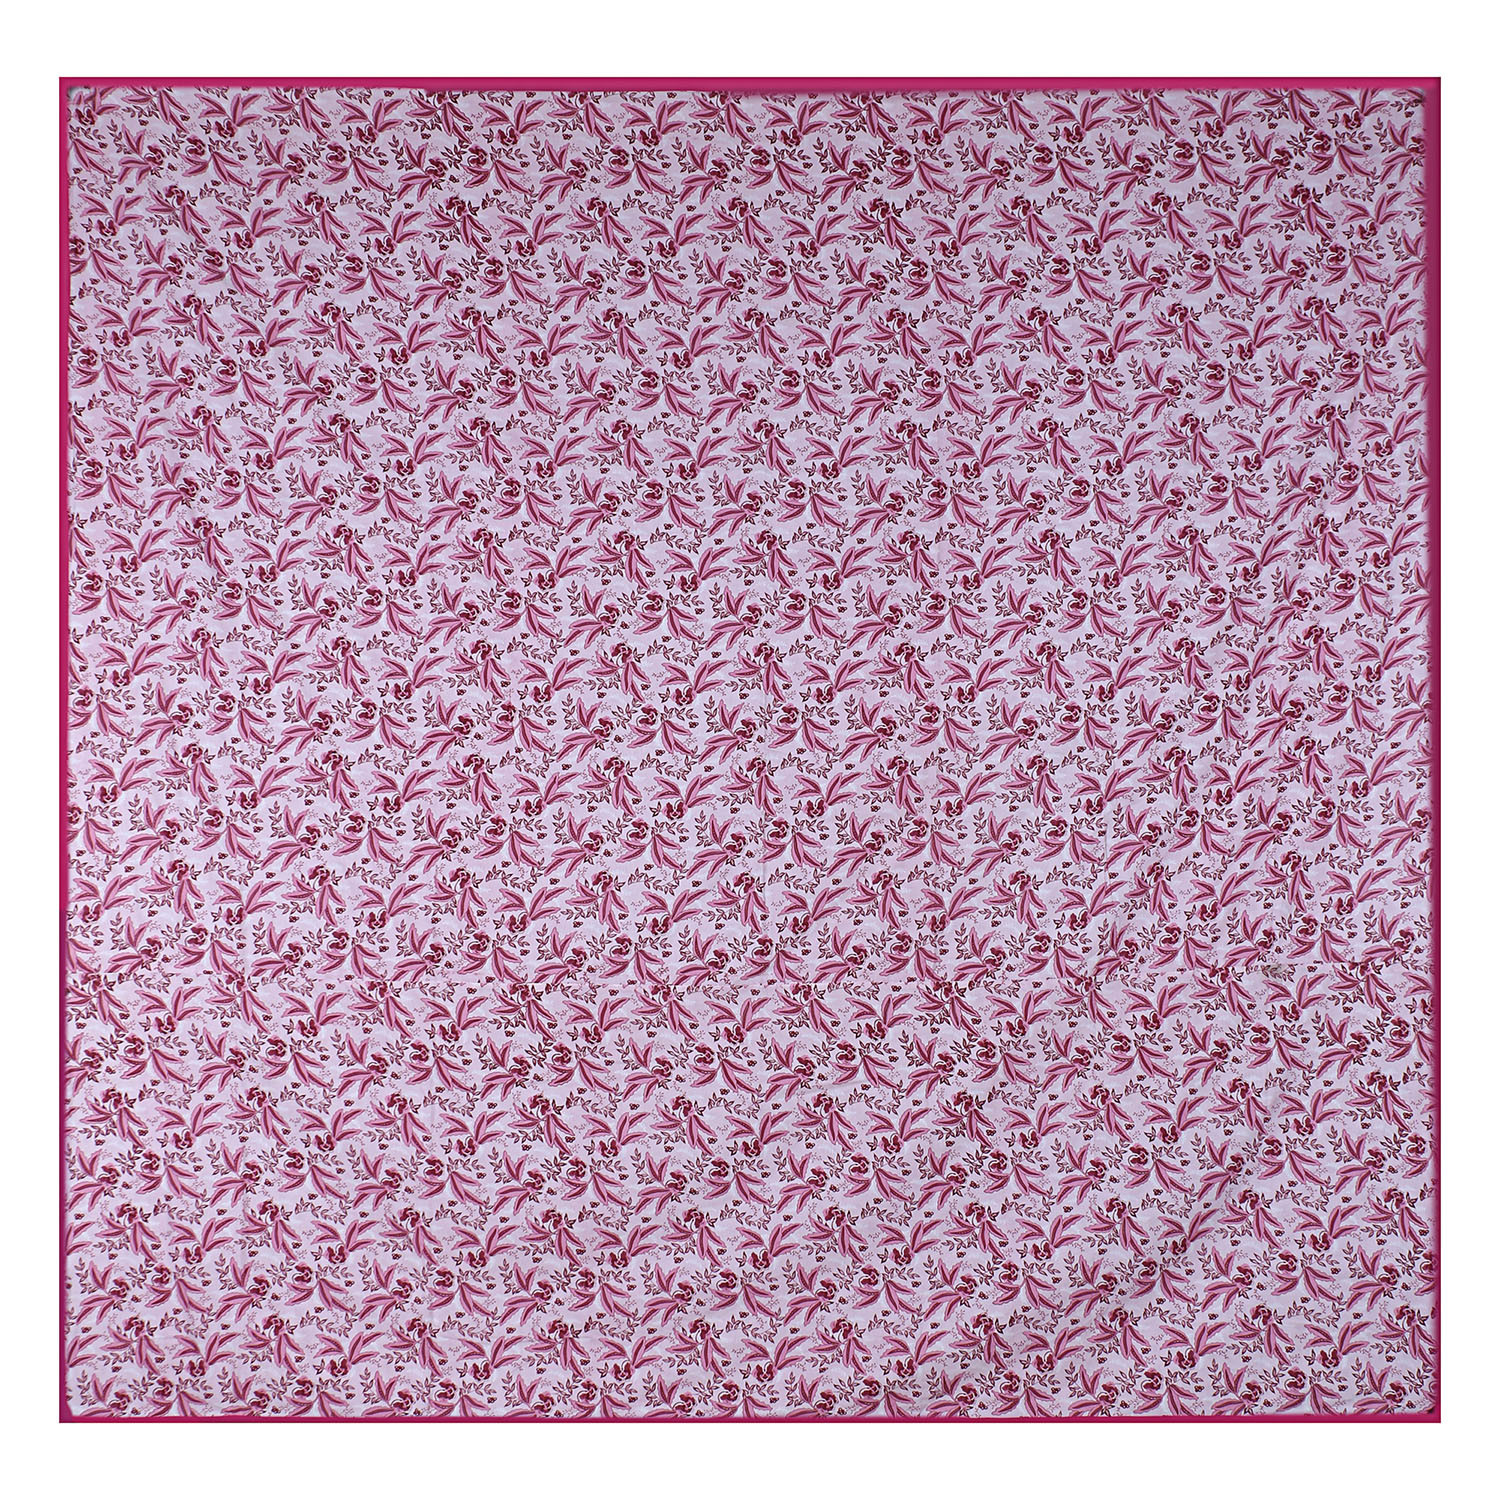 Kuber Industries Lightweight Tropical Plant Design Cotton Reversible Double Bed Dohar|AC Blanket For Home & Travelling (Pink)